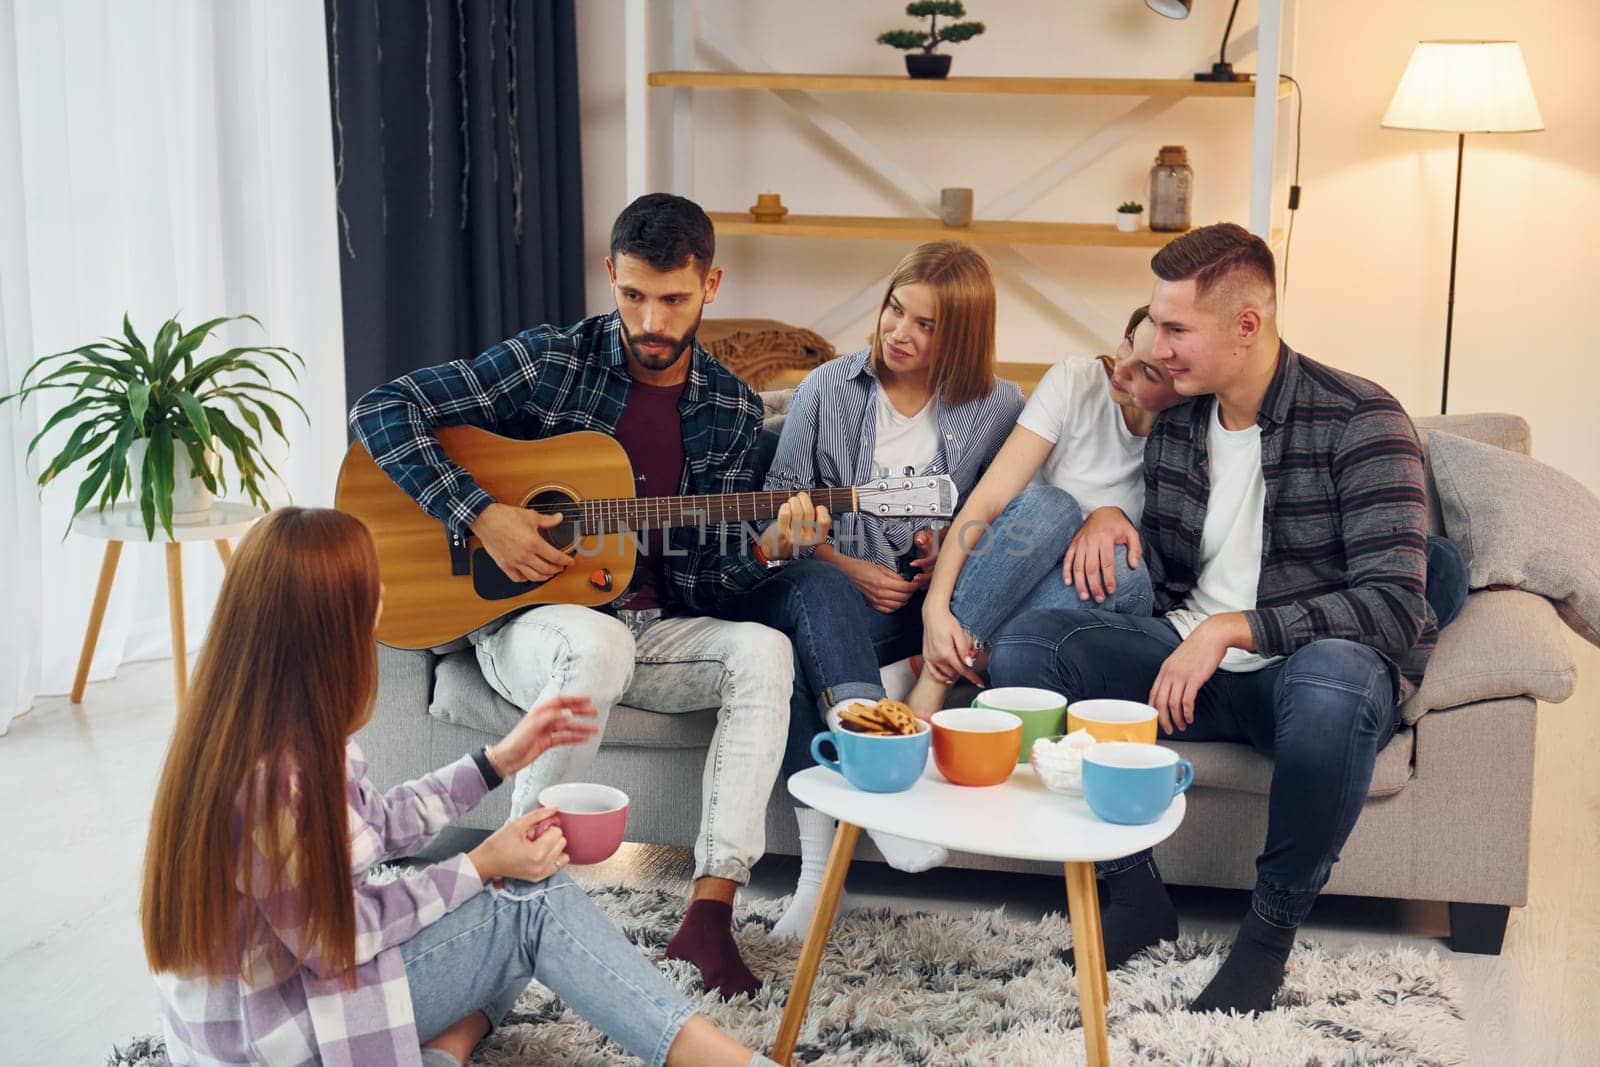 Playing acoustic guitar. Group of friends have party indoors together.